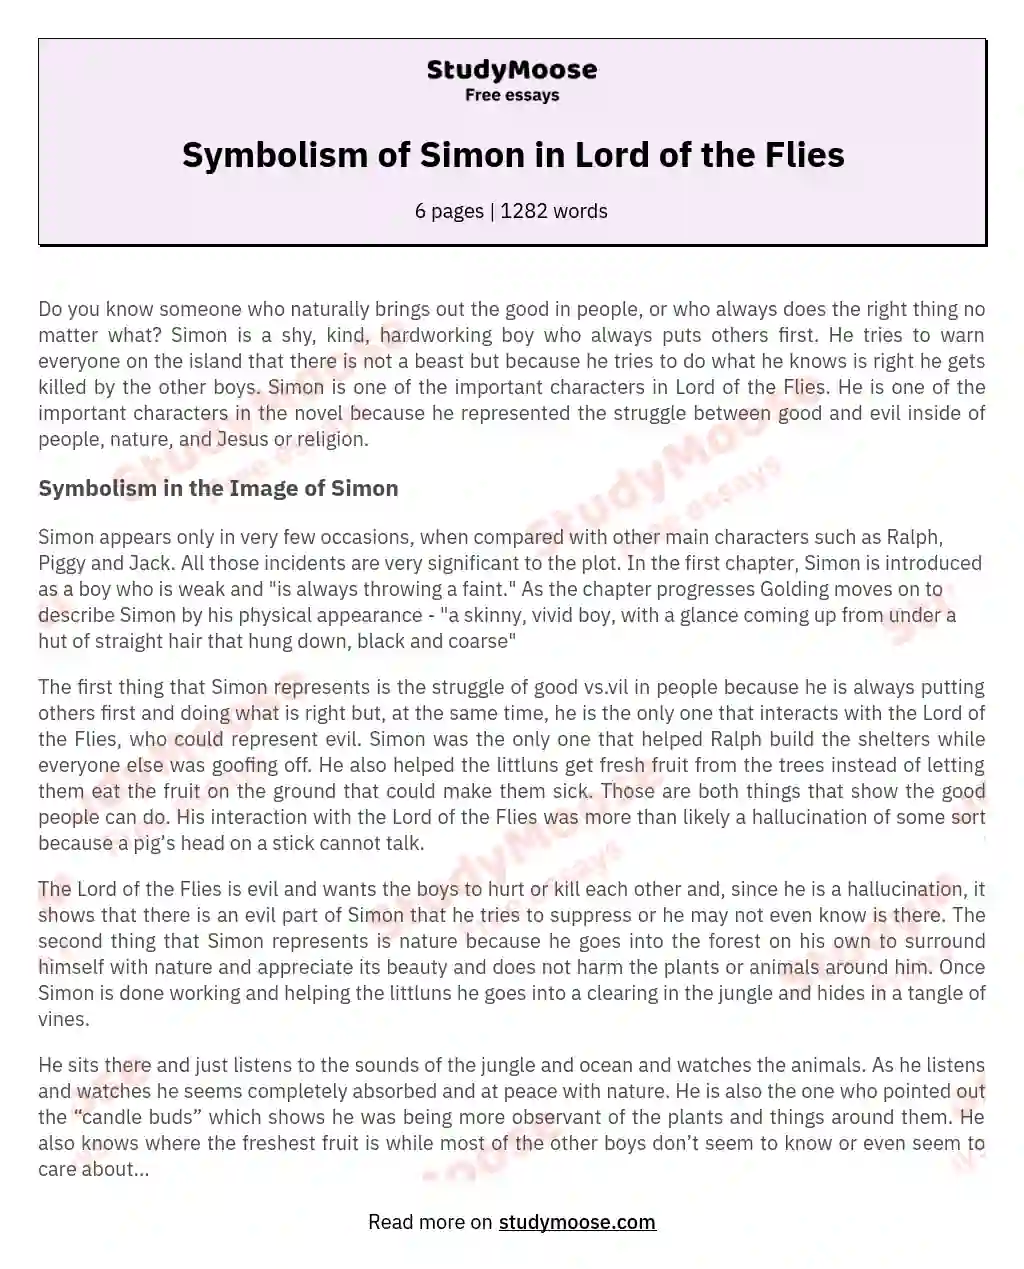 Symbolism of Simon in Lord of the Flies